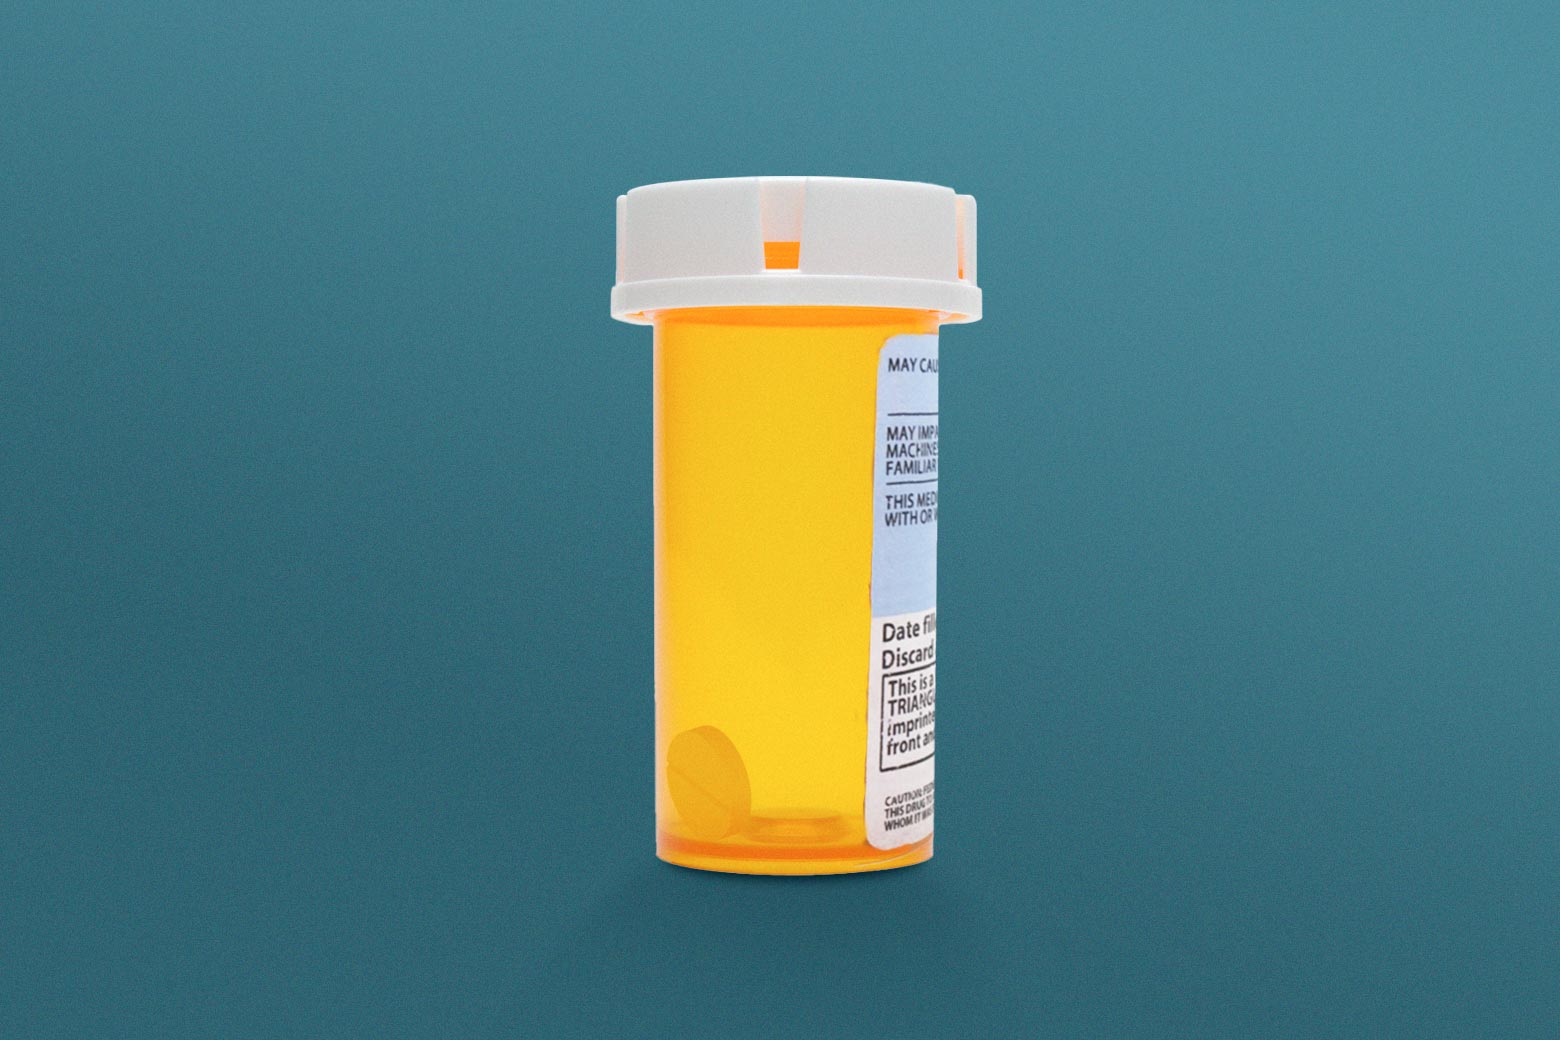 An almost empty pill bottle of Adderall.